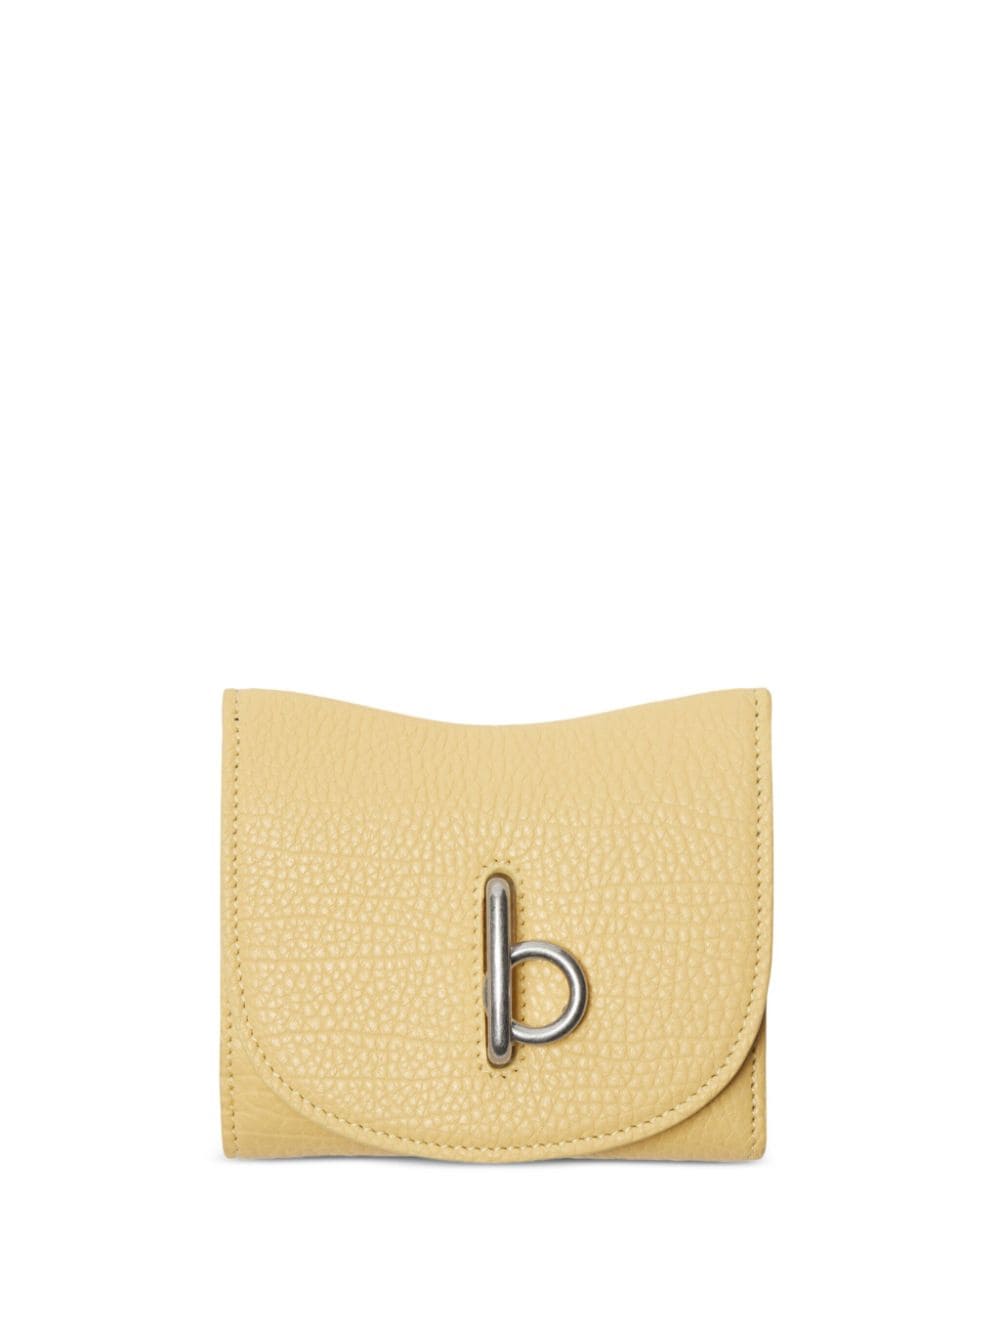 Burberry Rocking Horse leather wallet - Yellow von Burberry